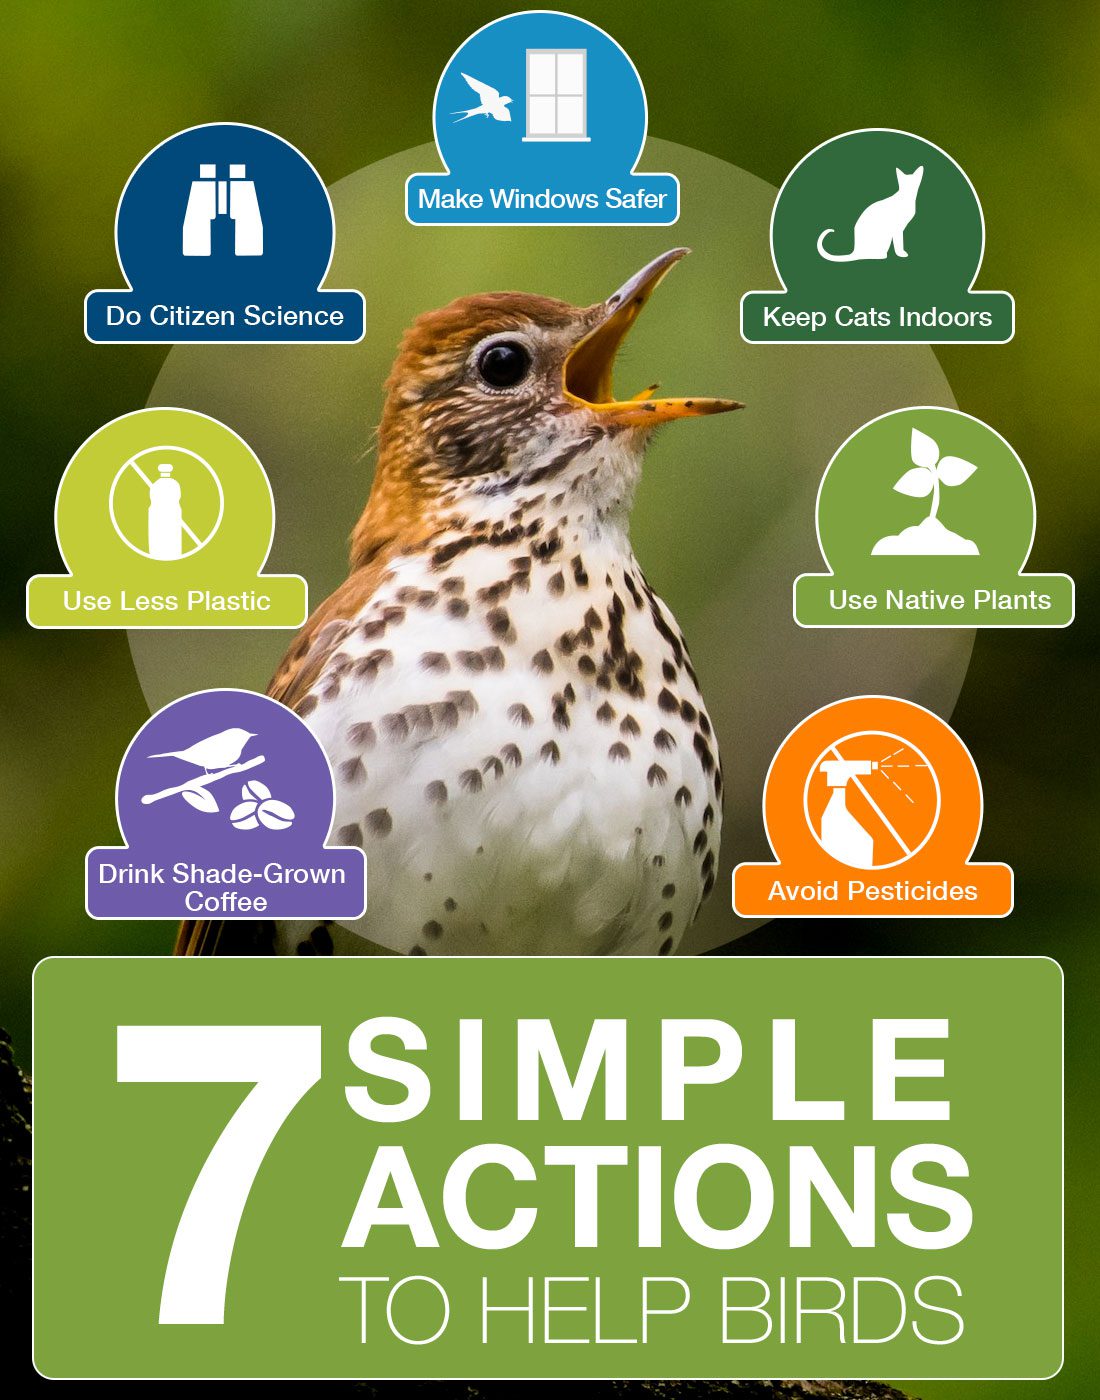 7 simple things to help birds, graphic by Sarah Seroussi. Wood Thrush by John Petruzzi/Macaulay Library.